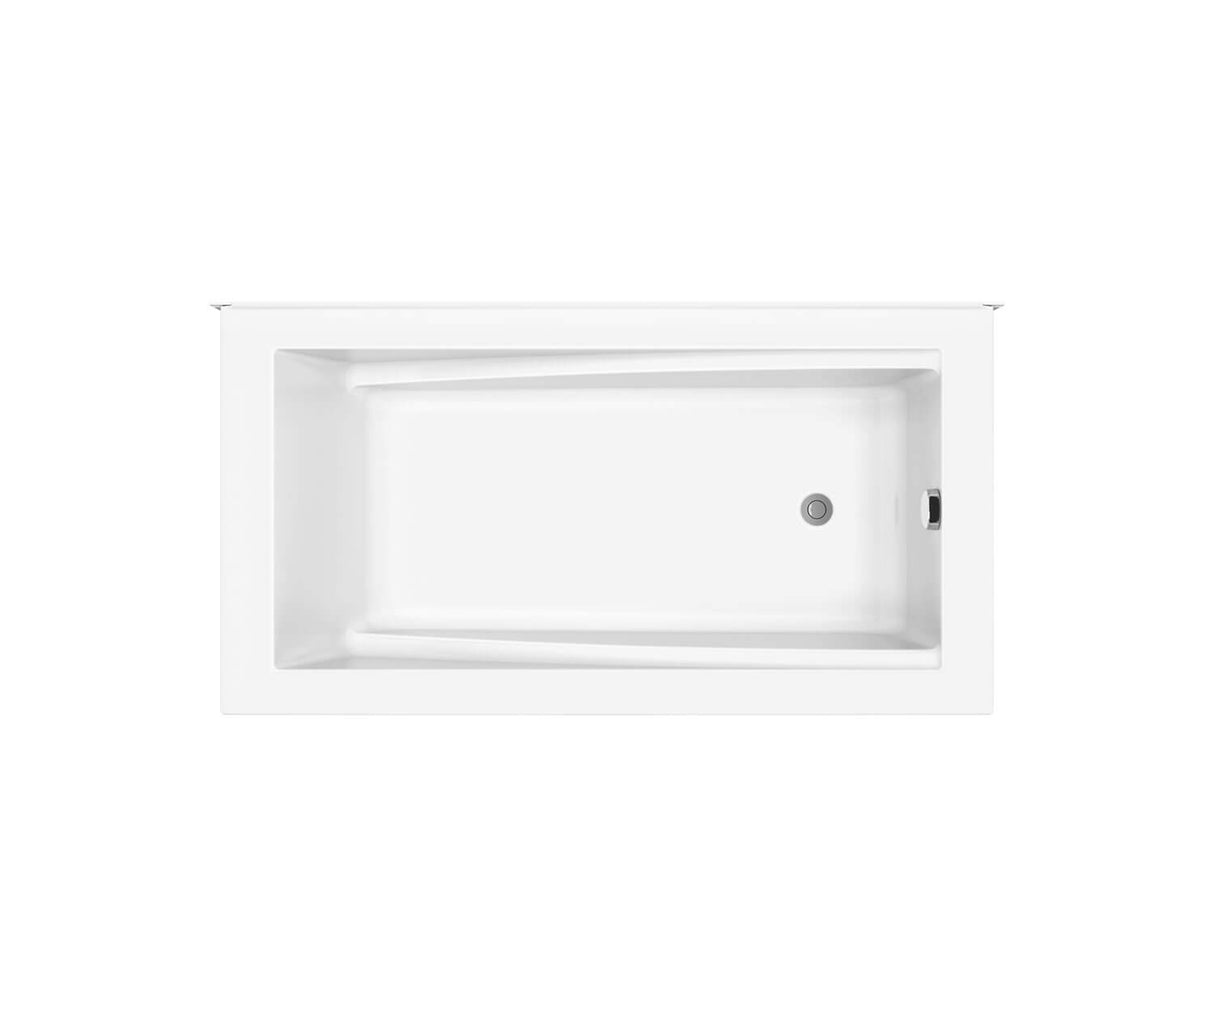 MAAX 410008-000-001-103 ModulR 6032 (With Armrests) Acrylic Corner Left Right-Hand Drain Bathtub in White